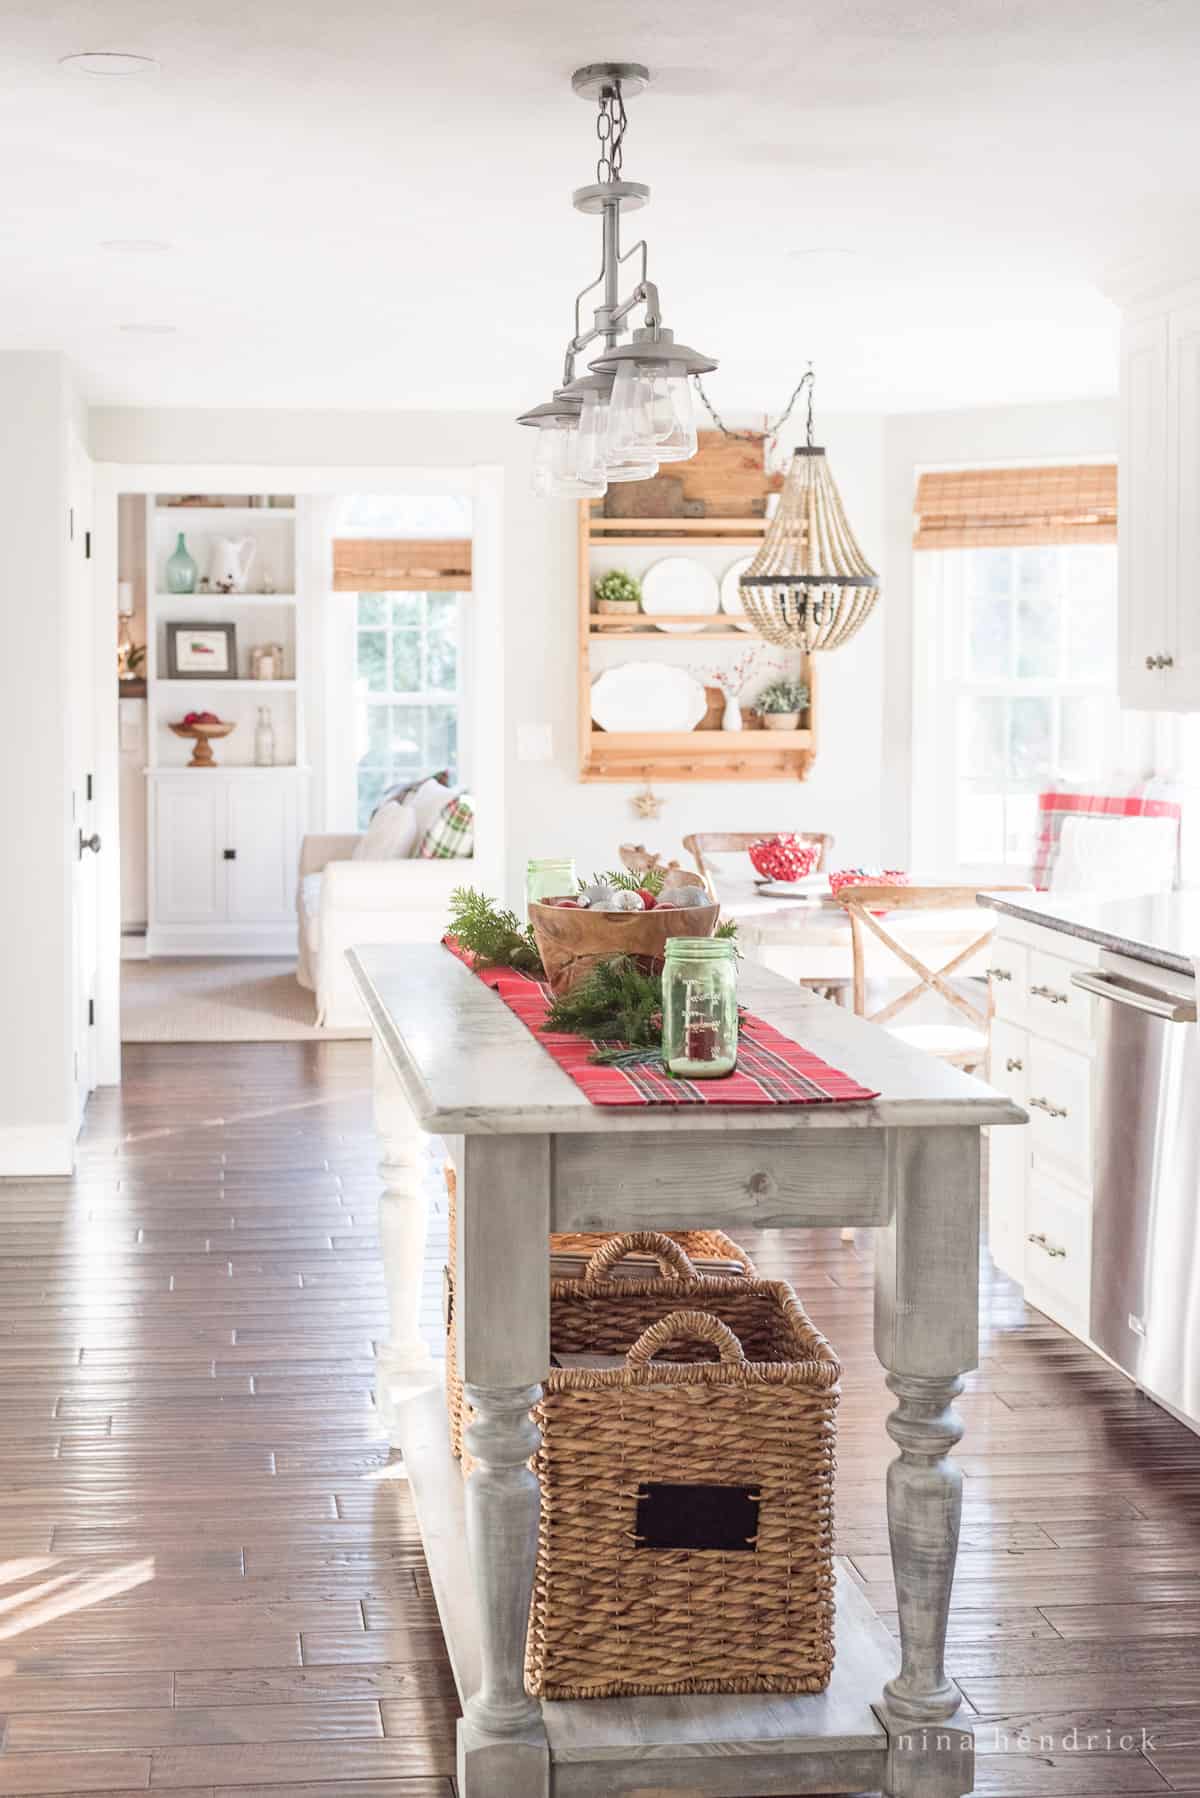 Simple Christmas decor in the kitchen with a rustic wooden island and dark floor